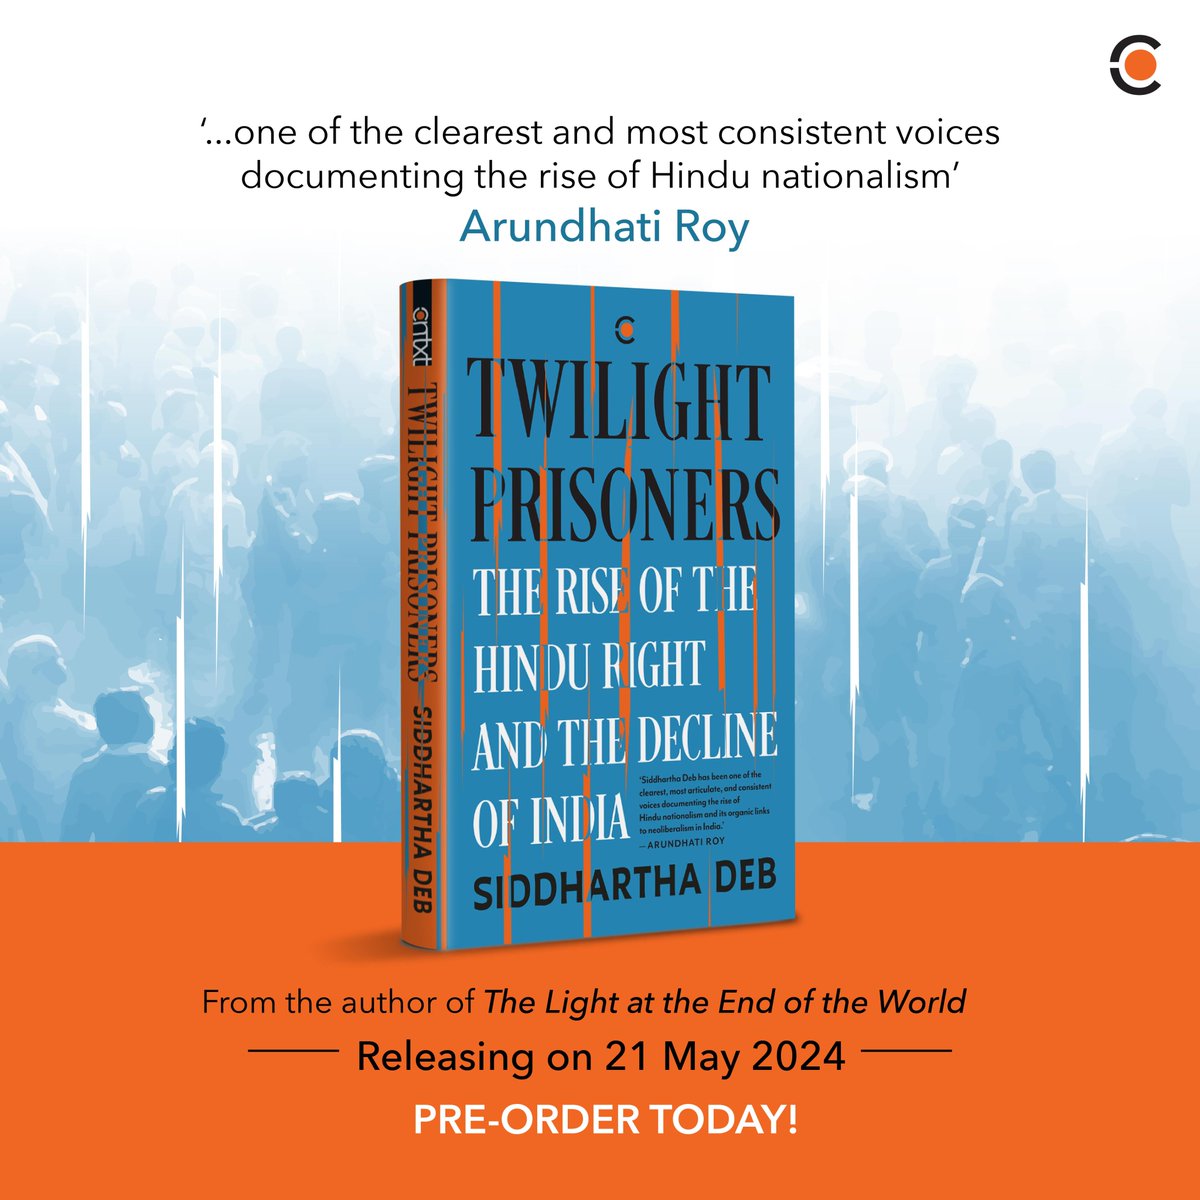 The wait is over! ⏳ @debhartha's much awaited collection about Indian politics and the rise of Hindu nationalism is releasing on 21 May 2024. Pre-order your copy today on amzn.in/d/fg5YJkH #Elections2024 #TwilightPrisoners #indianelections